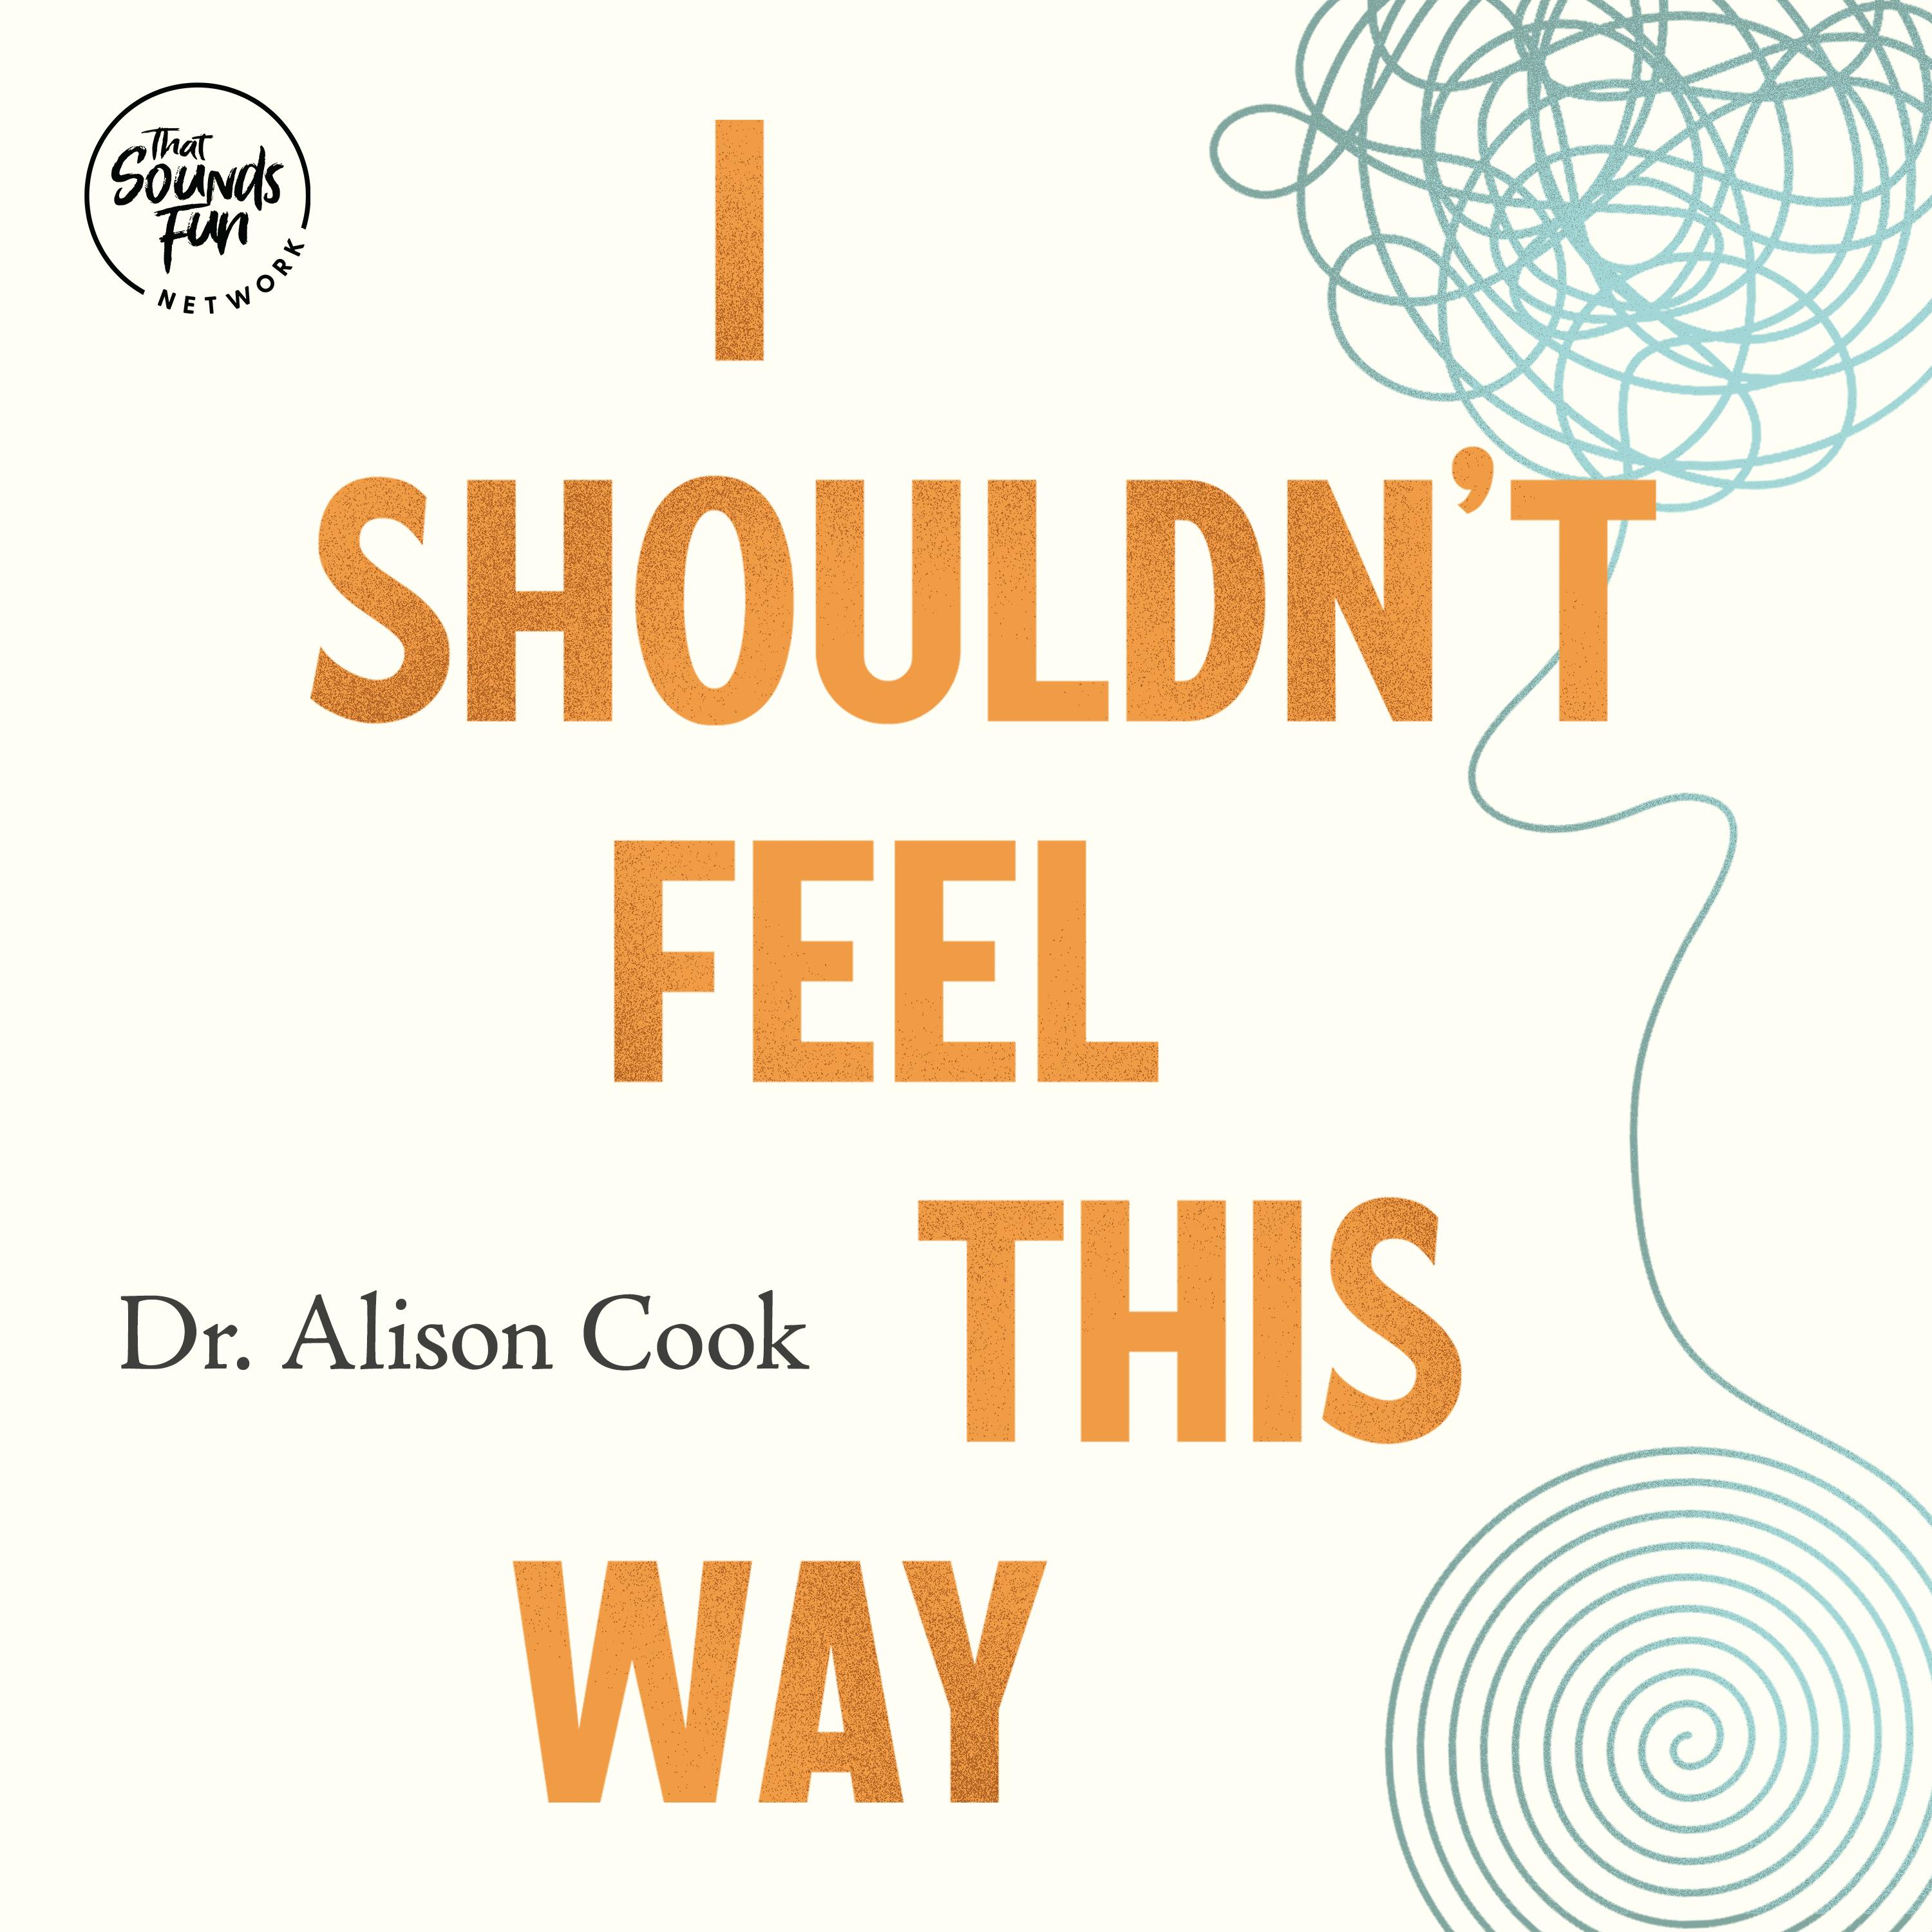 Episode 97: I Shouldn’t Feel This Anxious—Insights on Trauma & Healing with Monique Koven